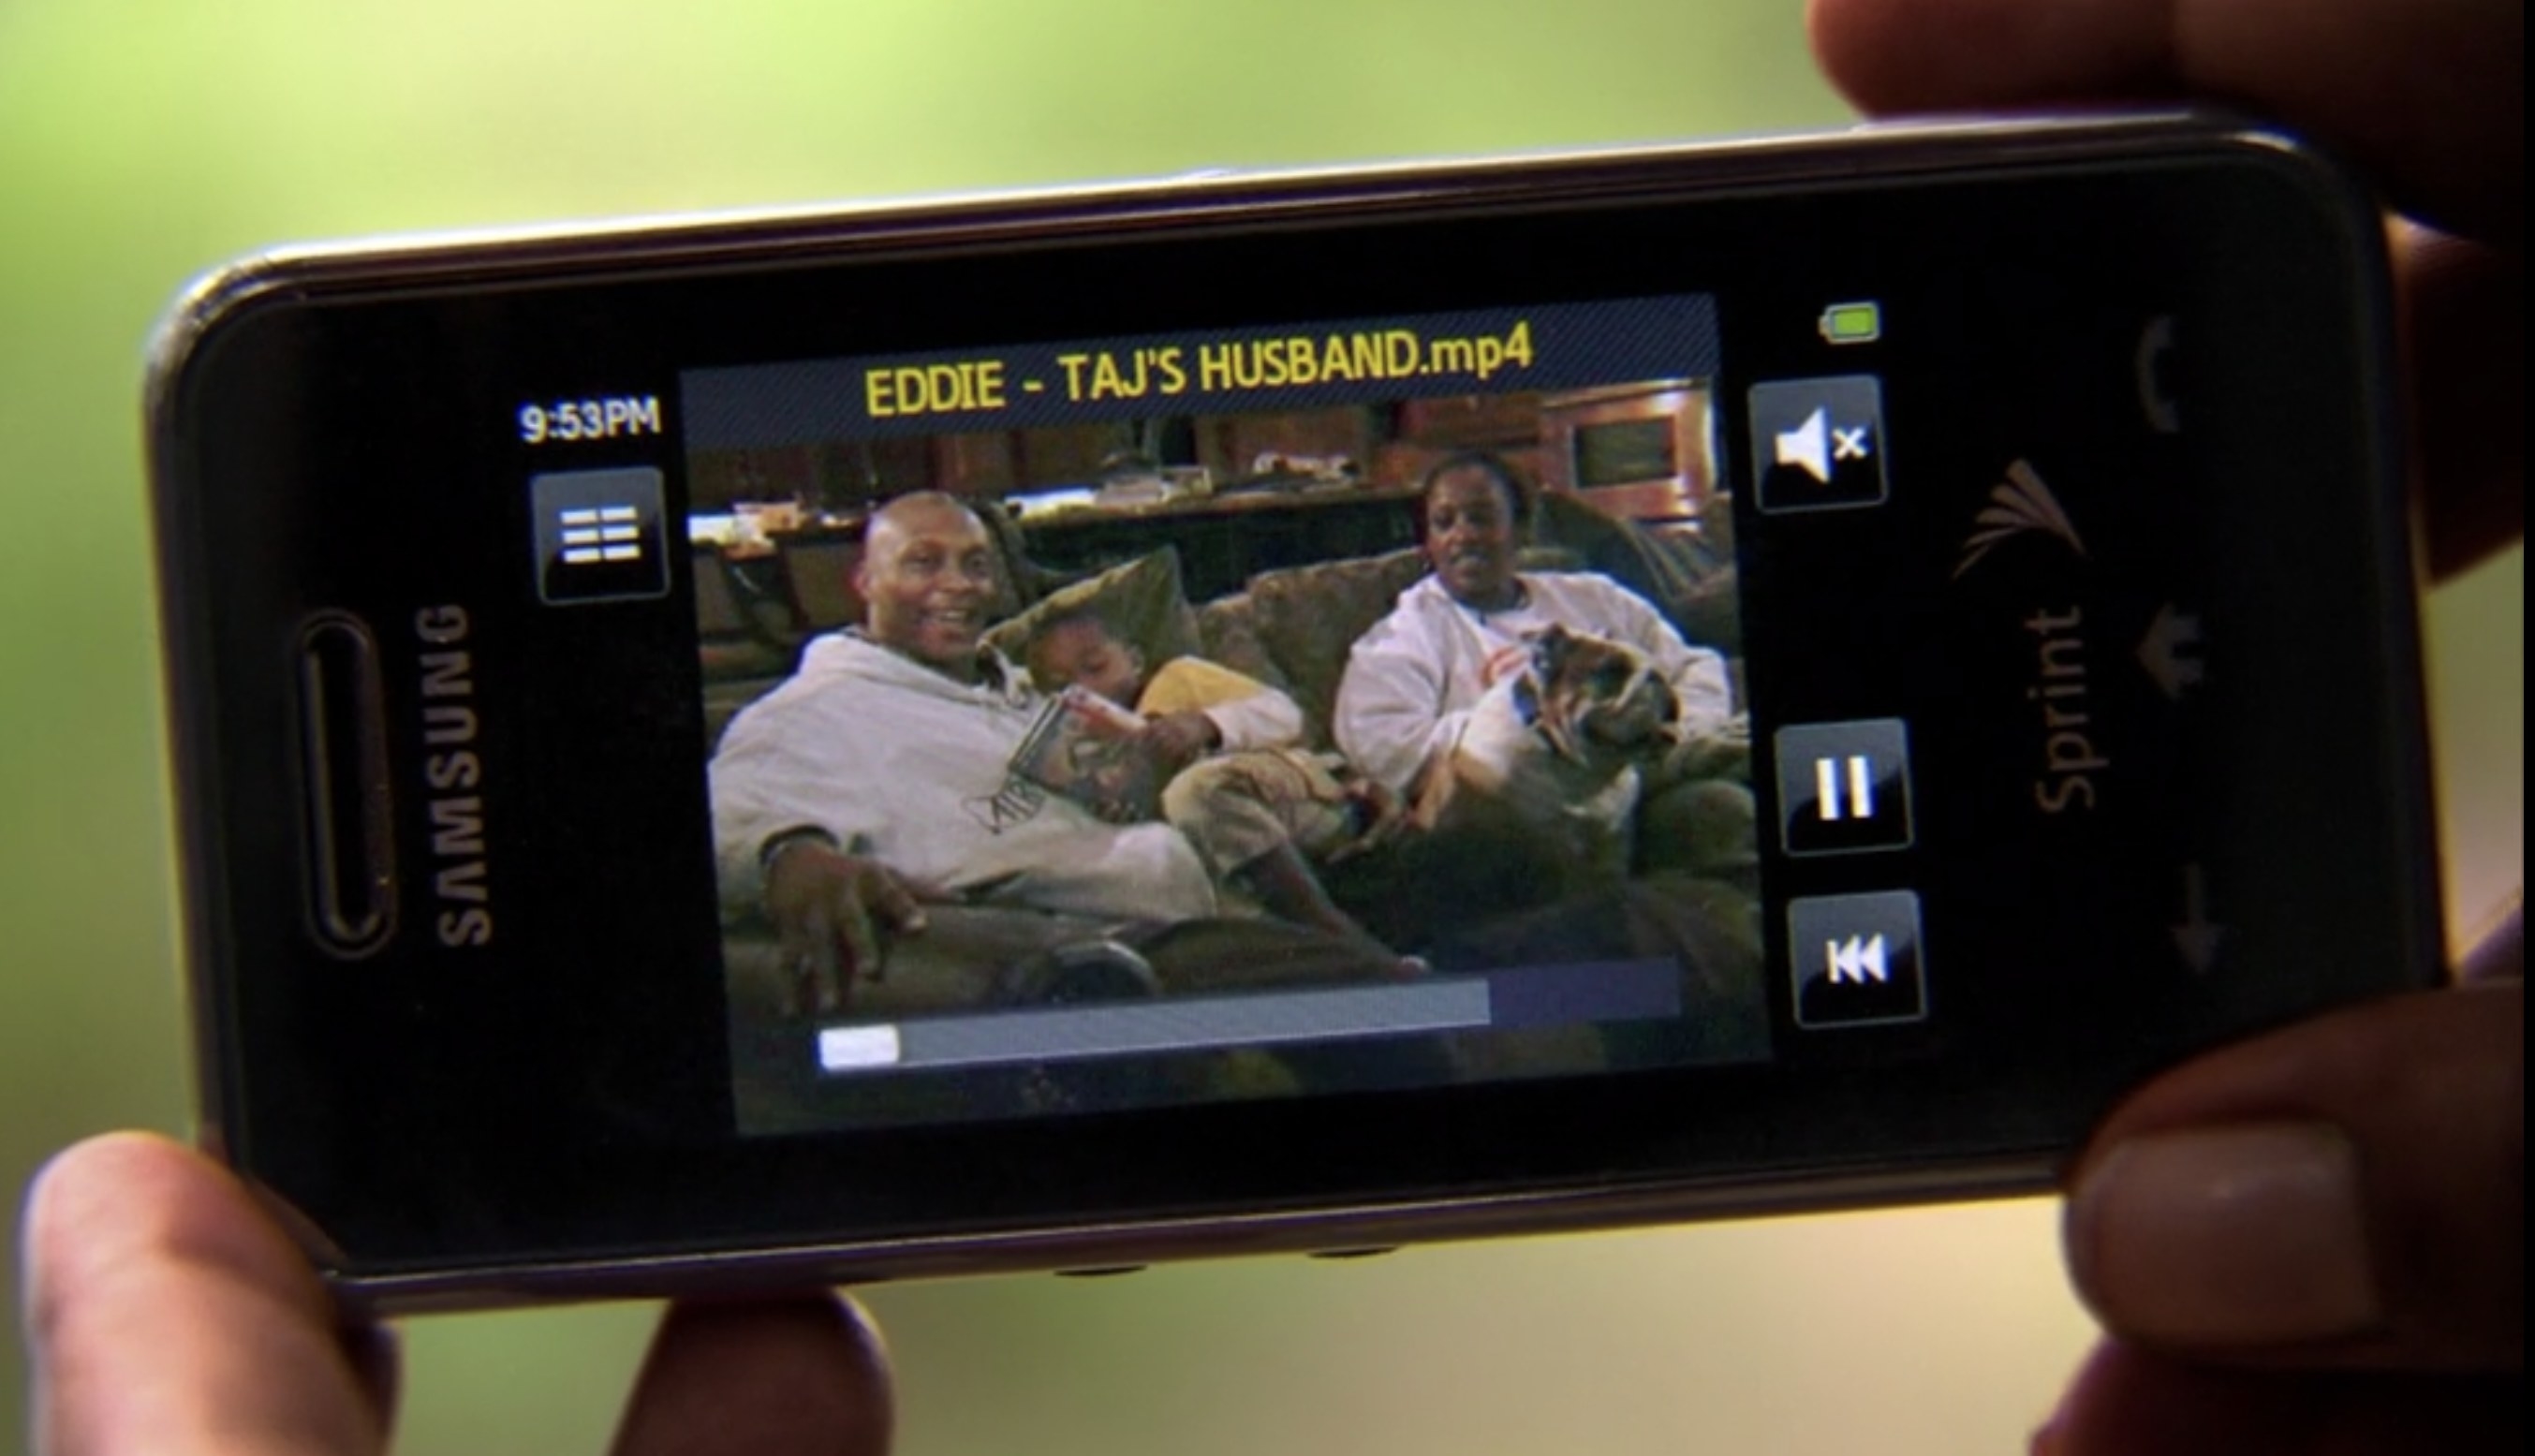 a video message from Taj&#x27;s husband on a small sprint phone from the mid-2000s